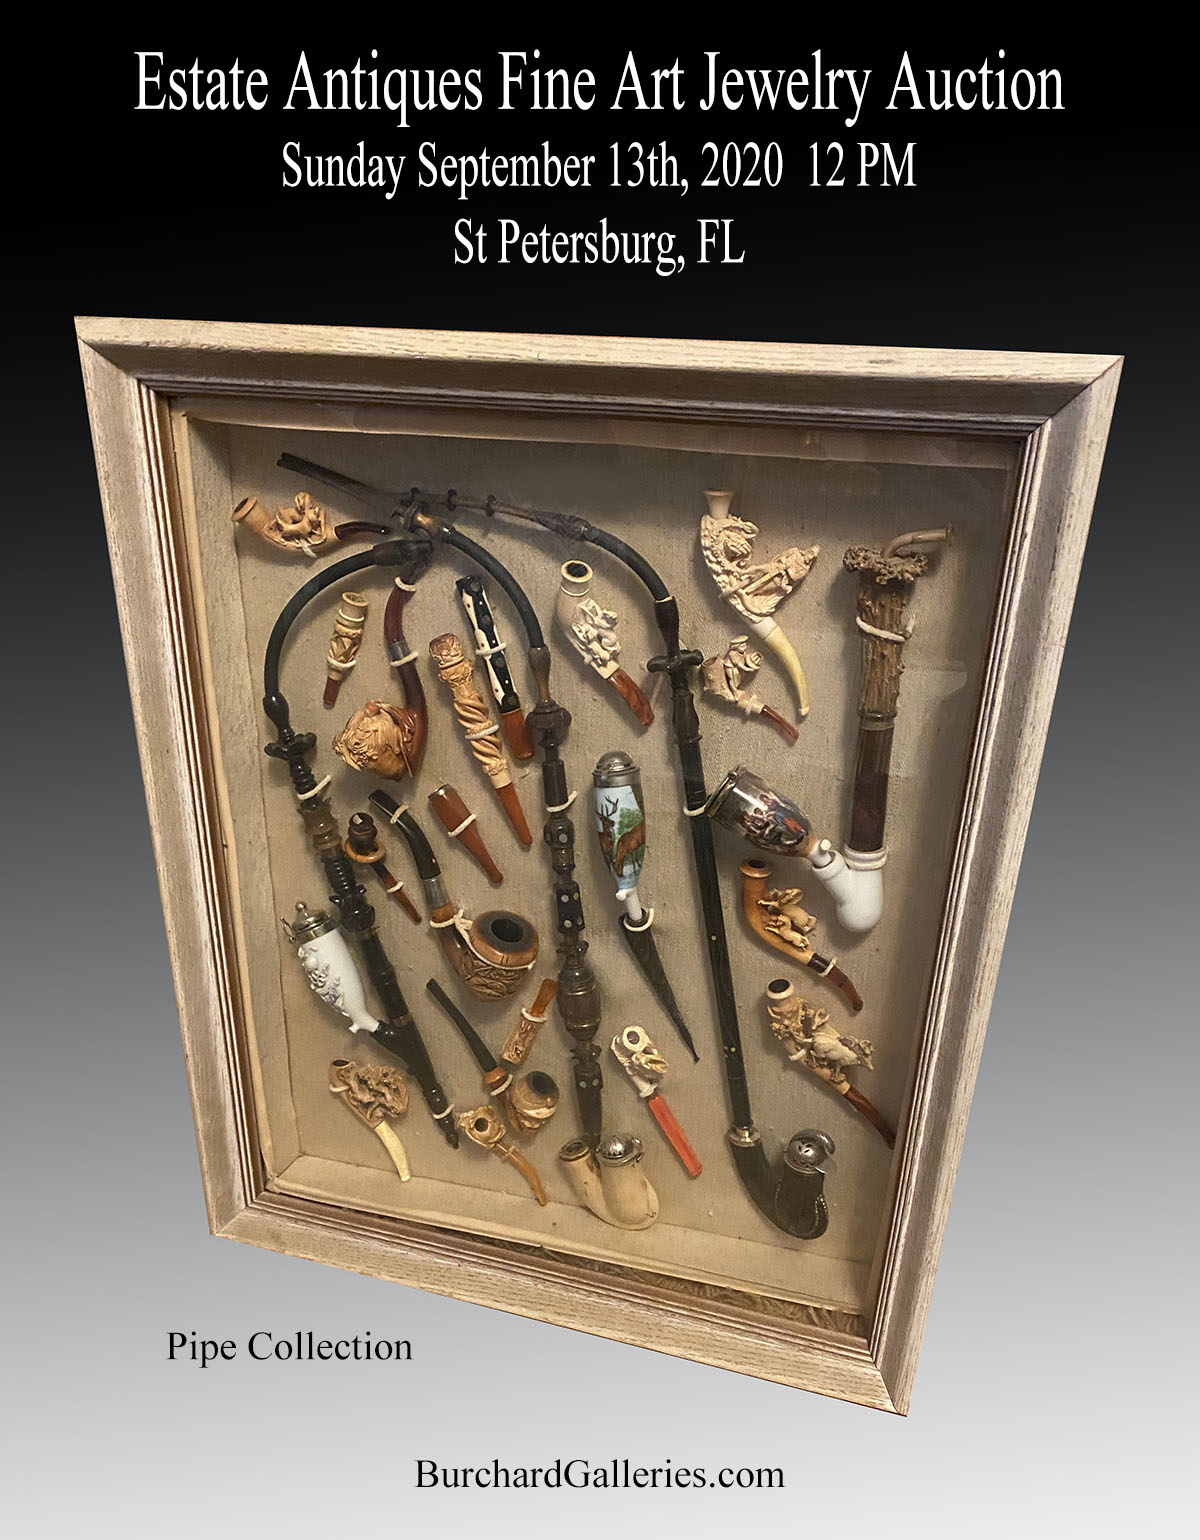 24 PC. FRAMED PIPE COLLECTION: